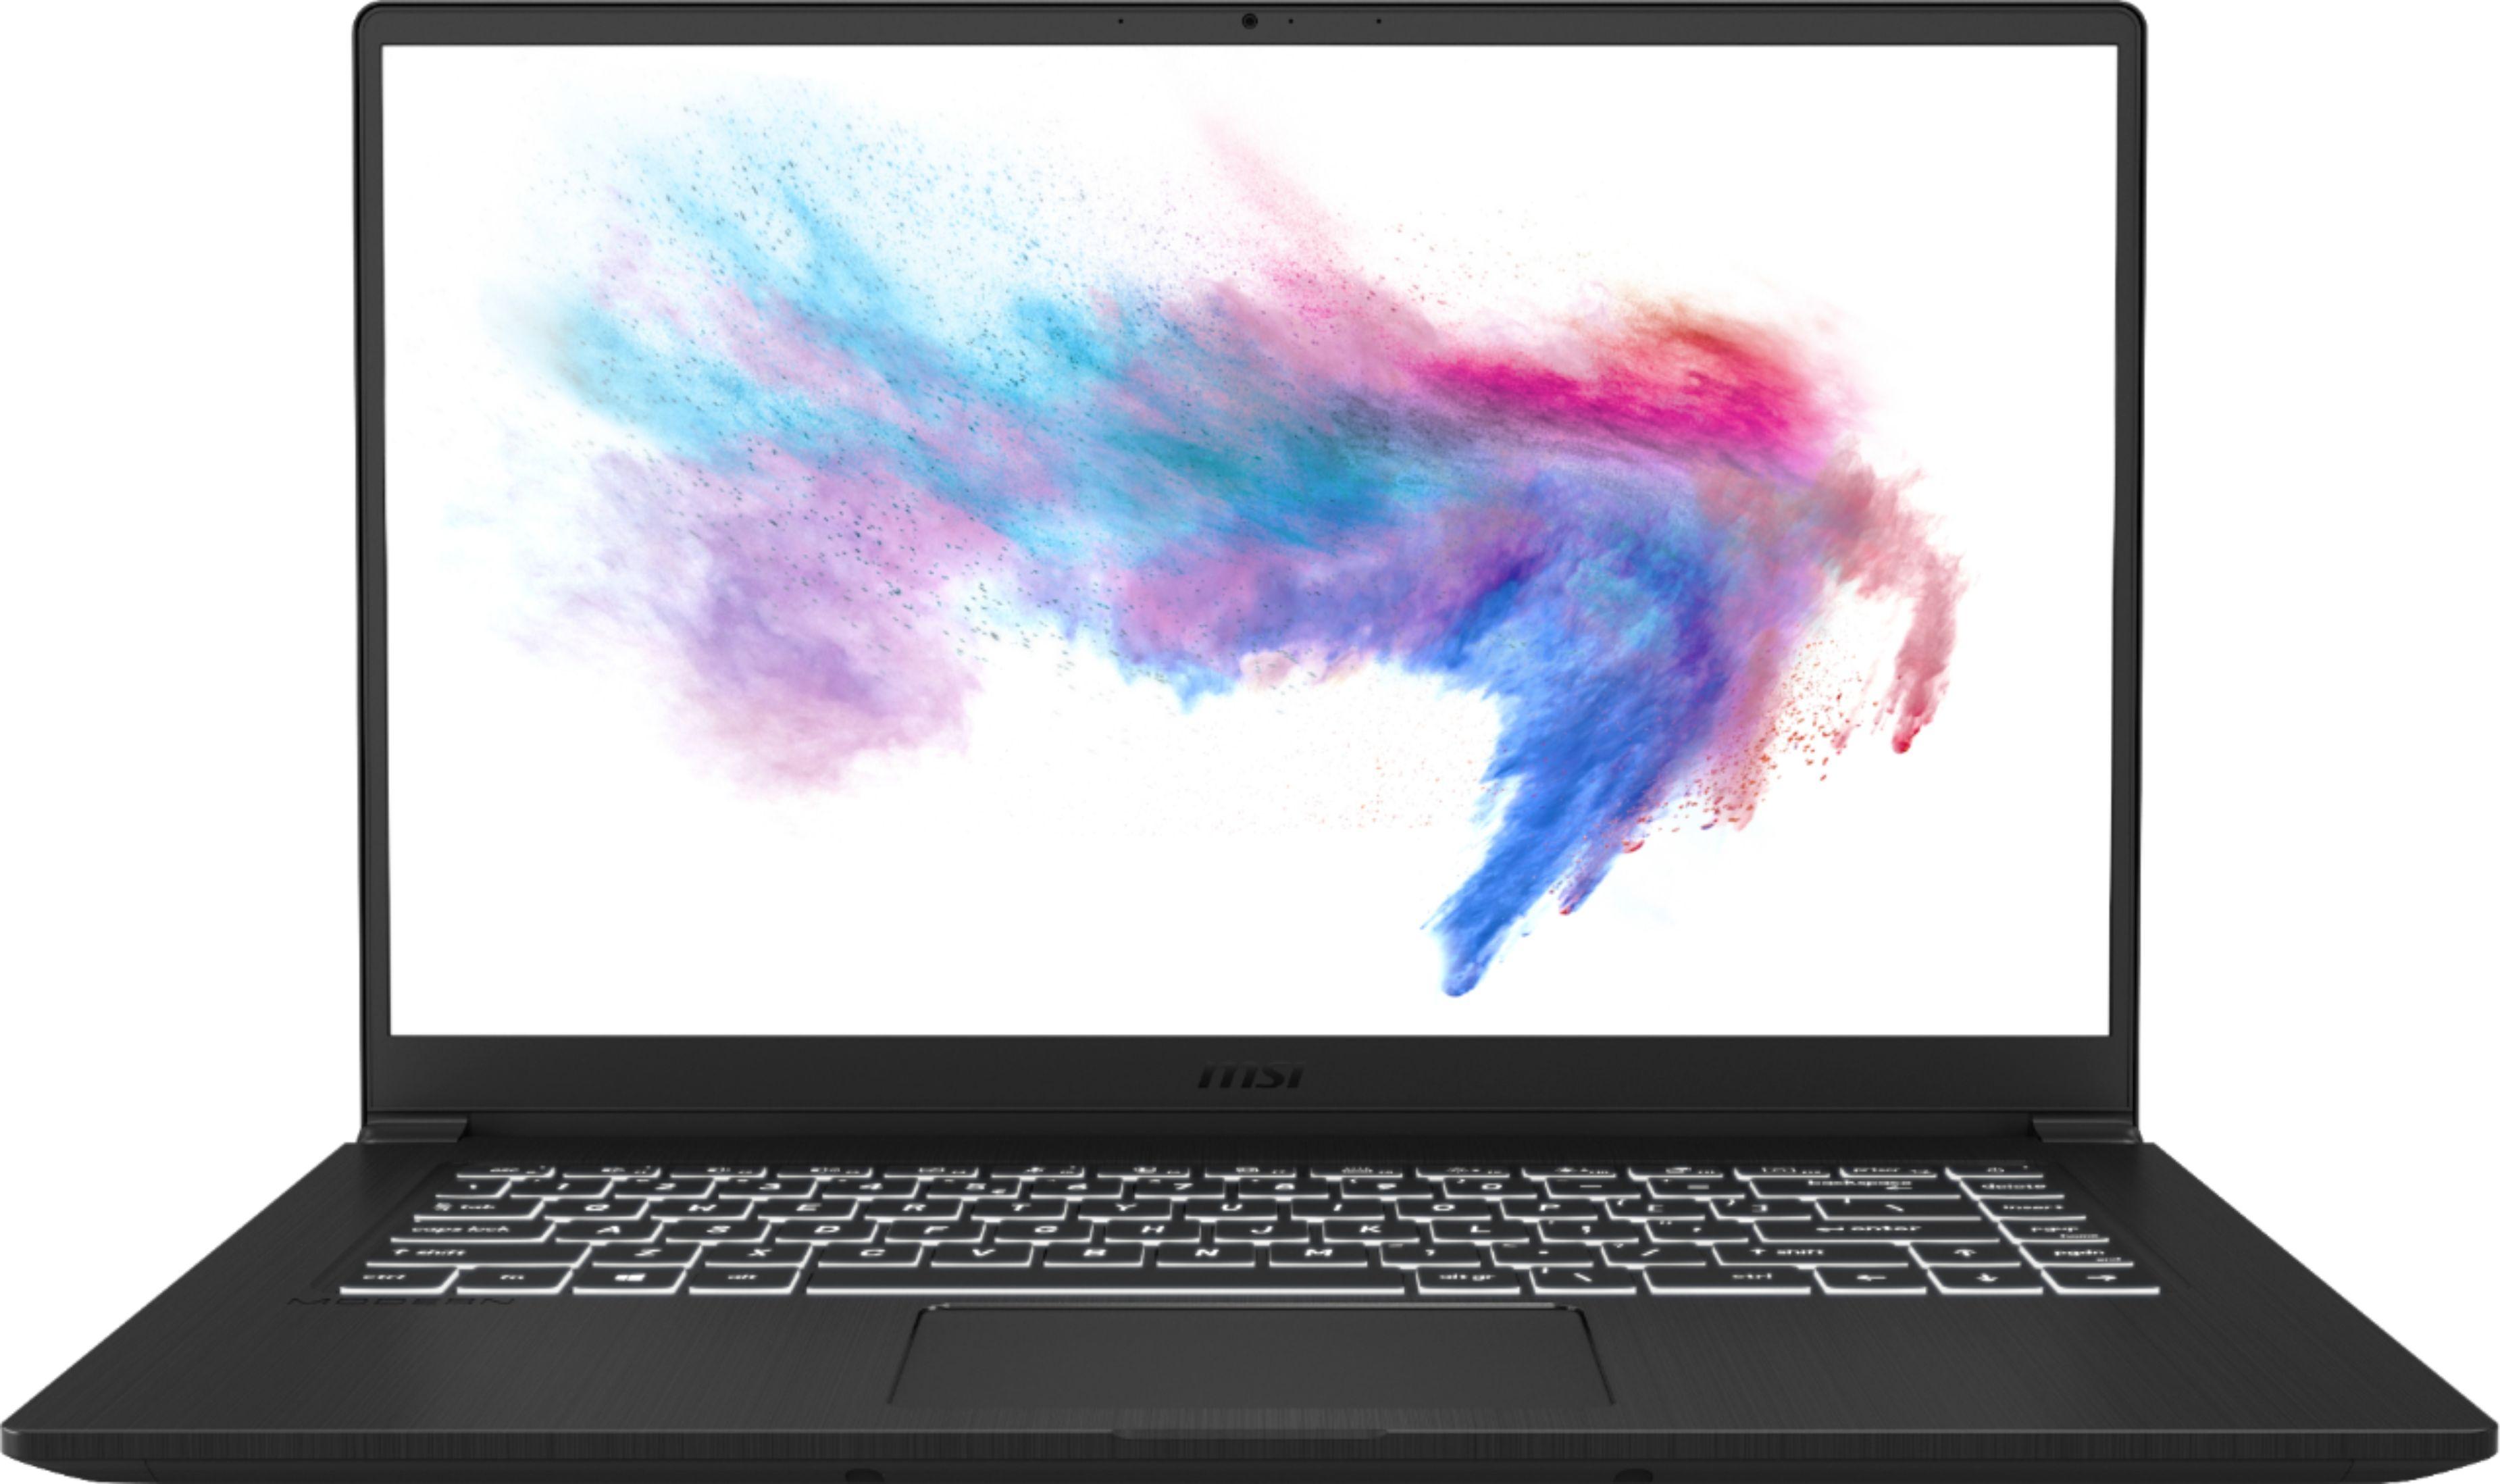 MSI Modern 15 i5 8GB 512GB Notebook Laptop for $499.99 Shipped